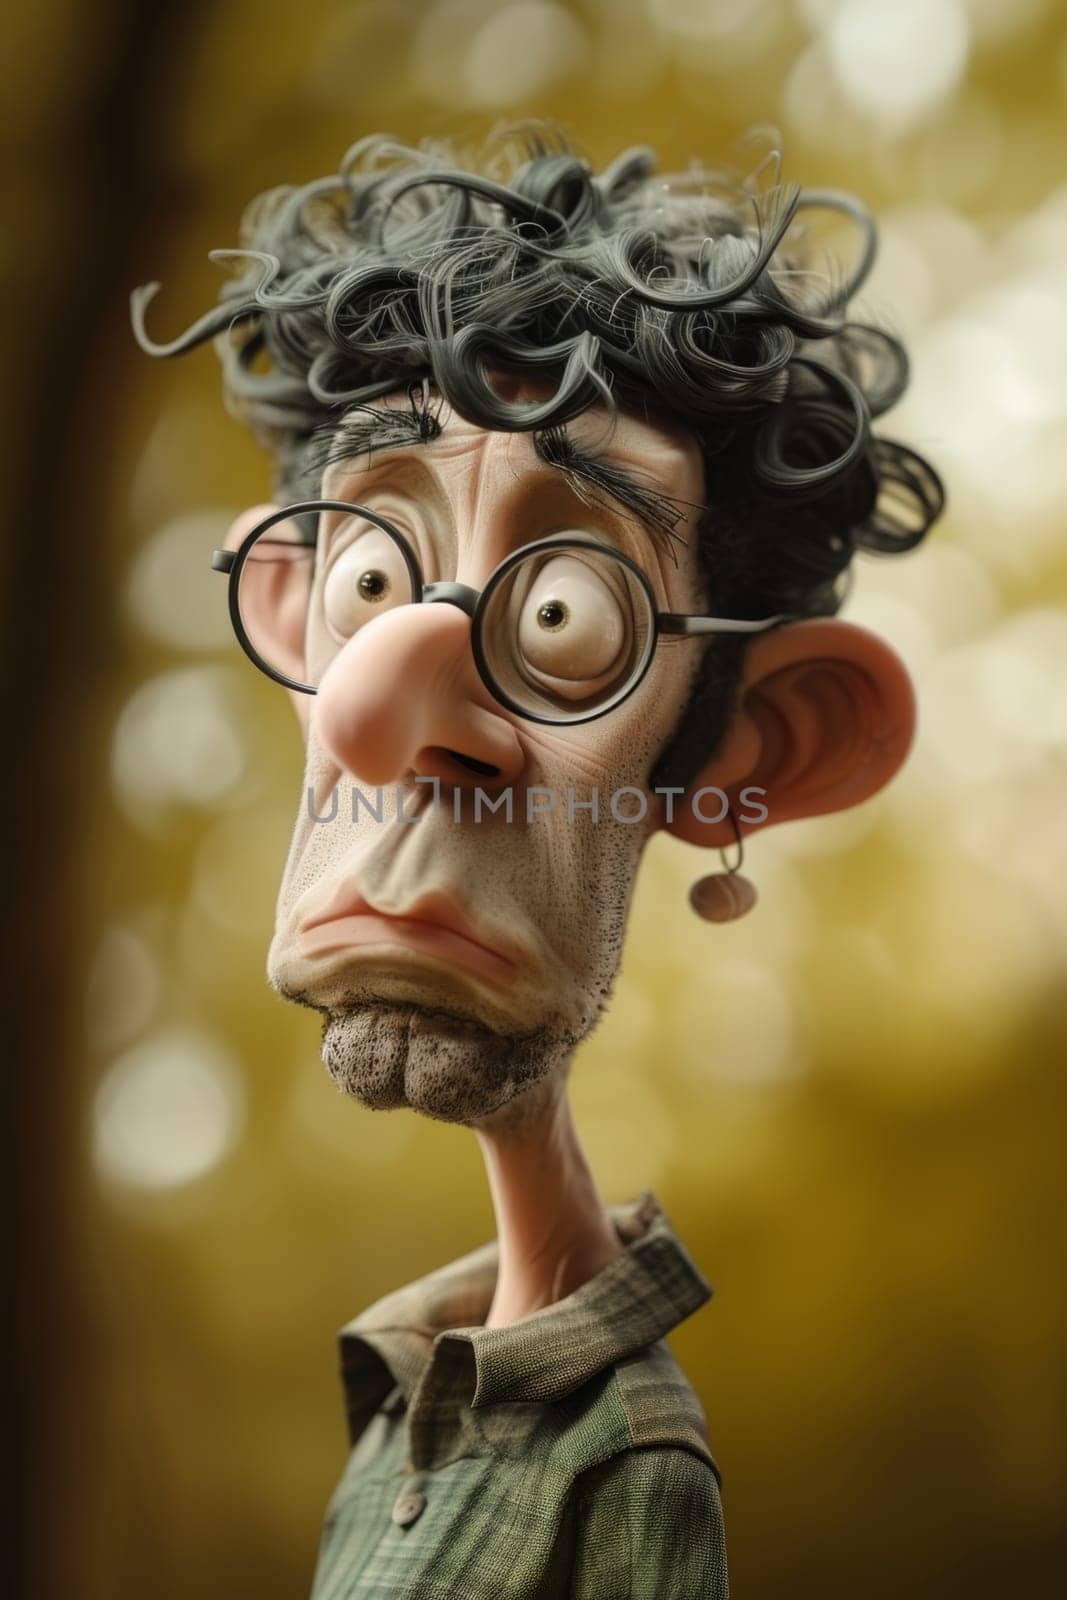 A funny cartoon character of a man in nature. 3d illustration.